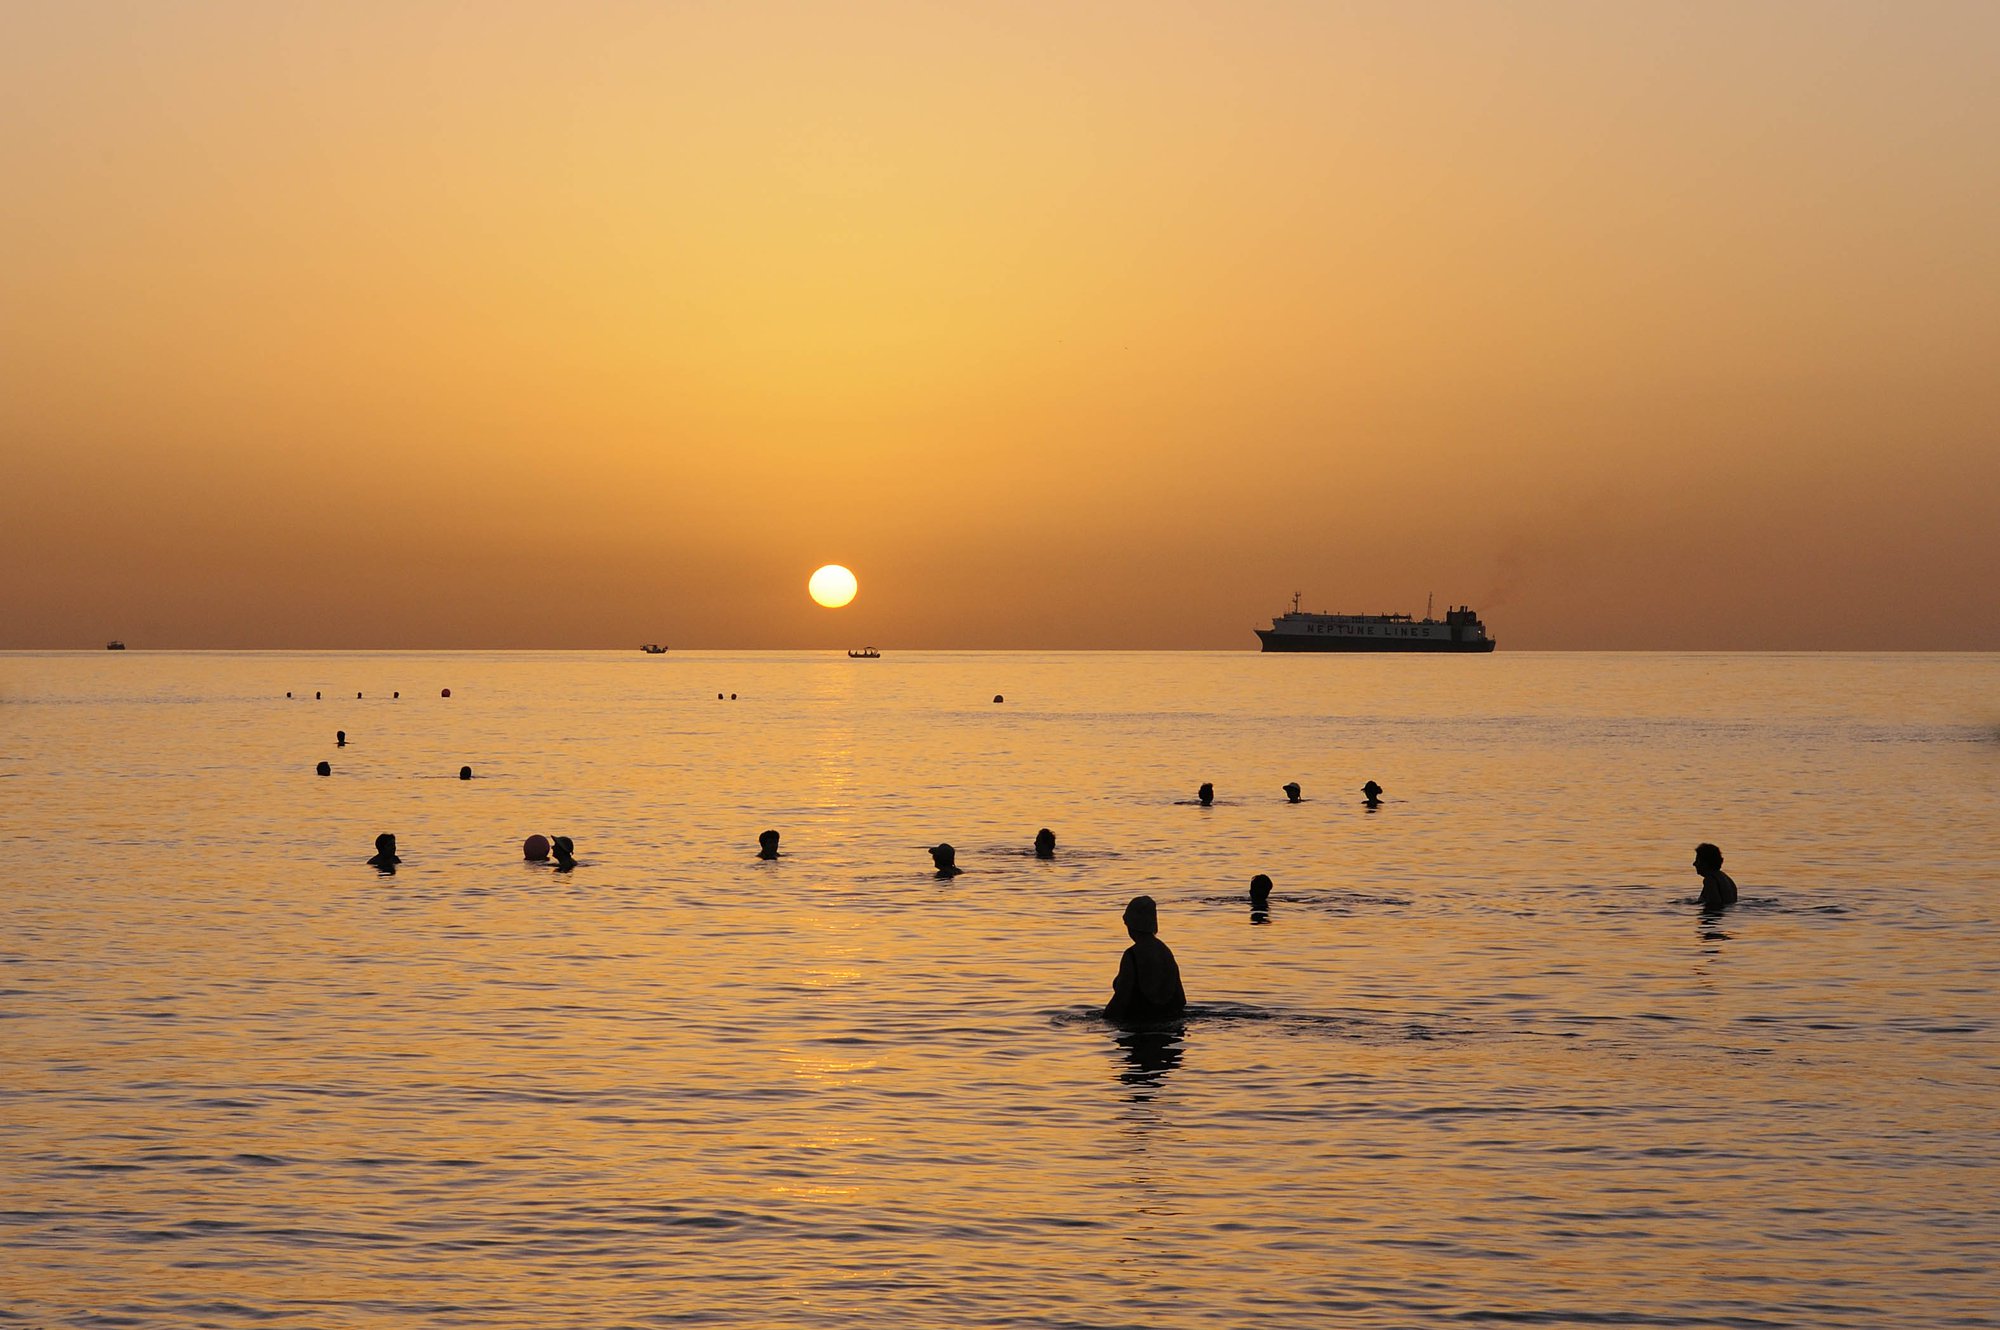 Christodoulos Panayiotou, Sunrise (1 October 2010, 6.15), c-print, 56.5 x 76 cm (22 1/4 x 29 7/8 in), 2011